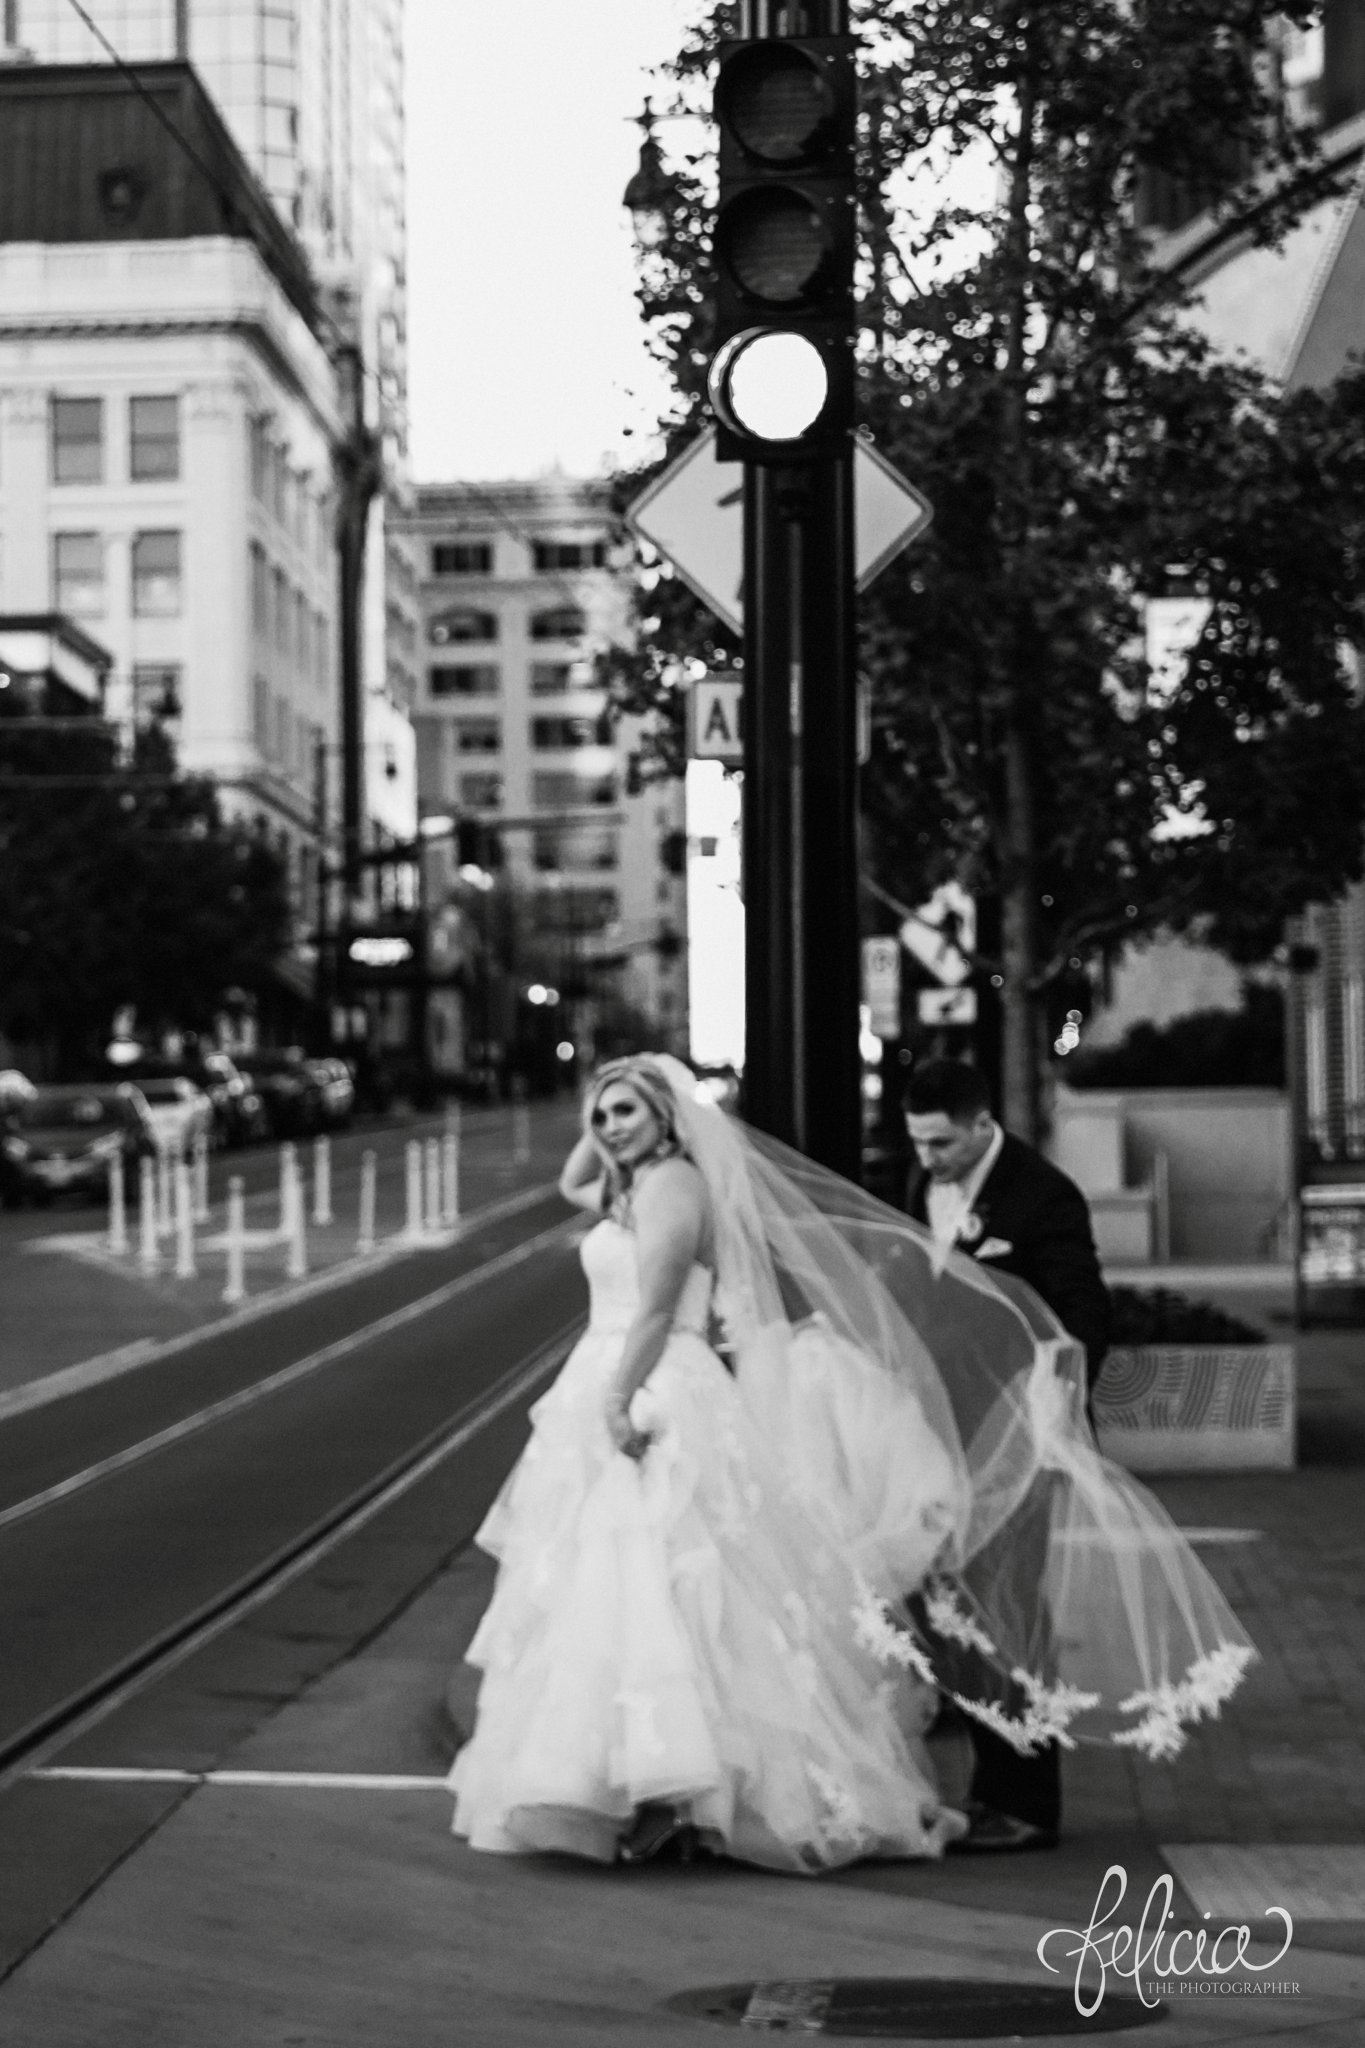 images by feliciathephotographer.com | wedding photographer | downtown kansas city | black and white | bride and groom | urban | romantic | long lace dress | belle vogue | full train | 